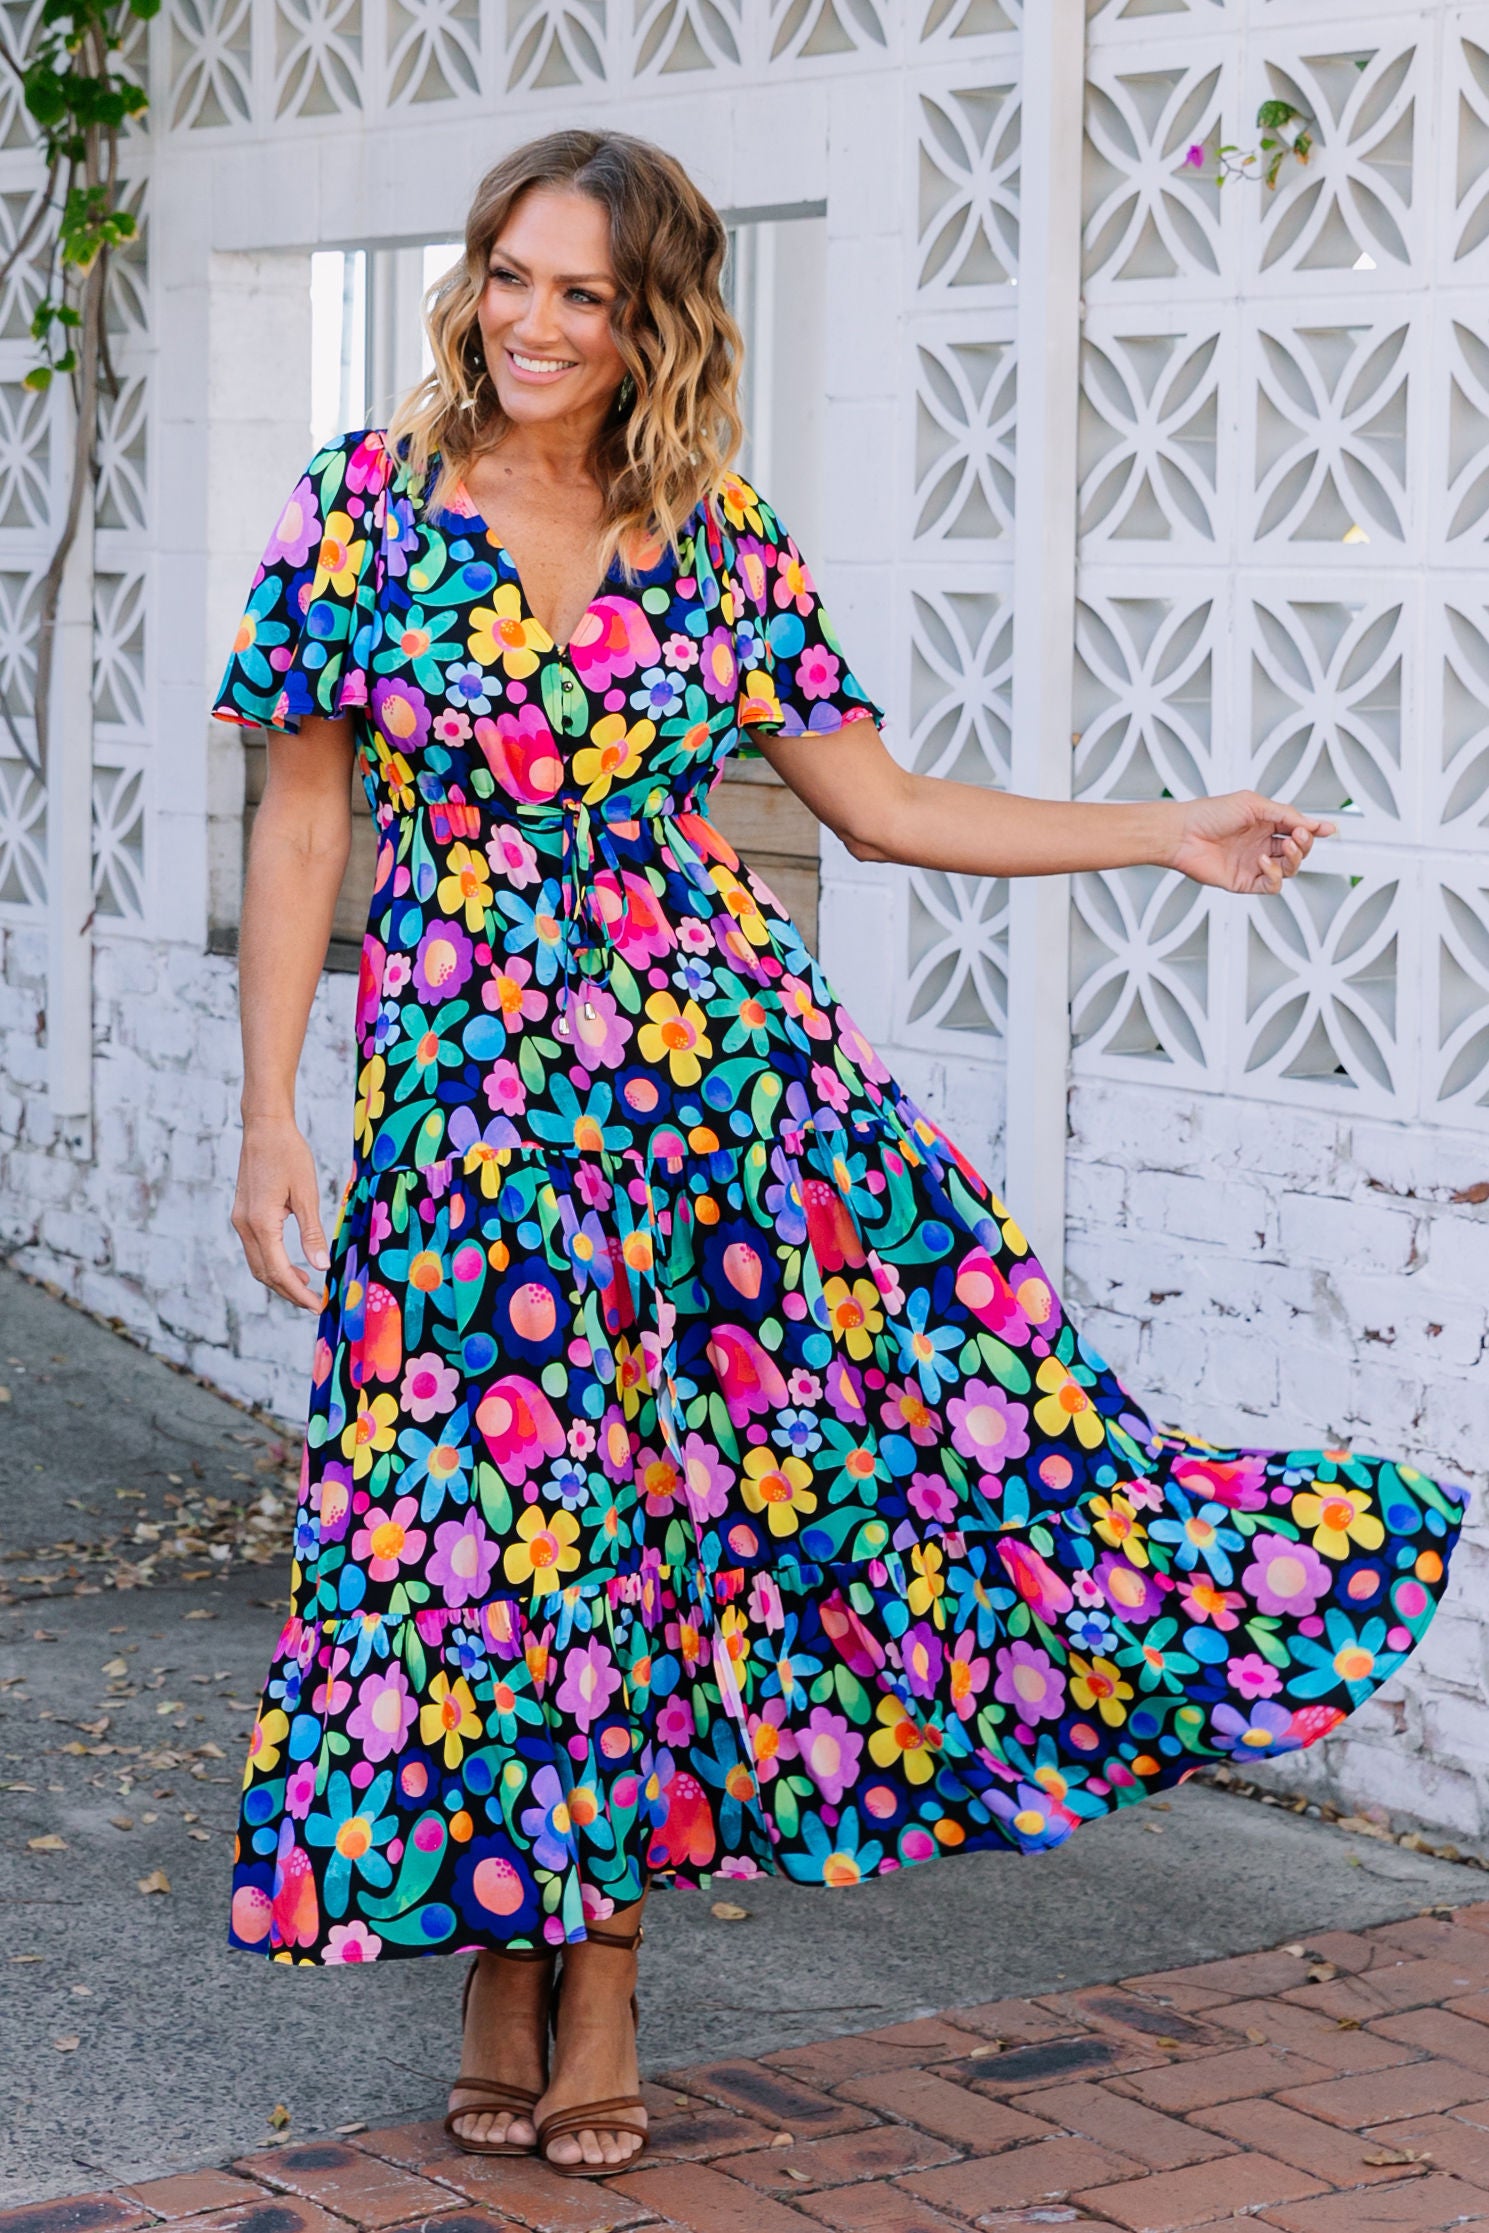 Poppy Chiffon Floral Print Dress | Made To Order